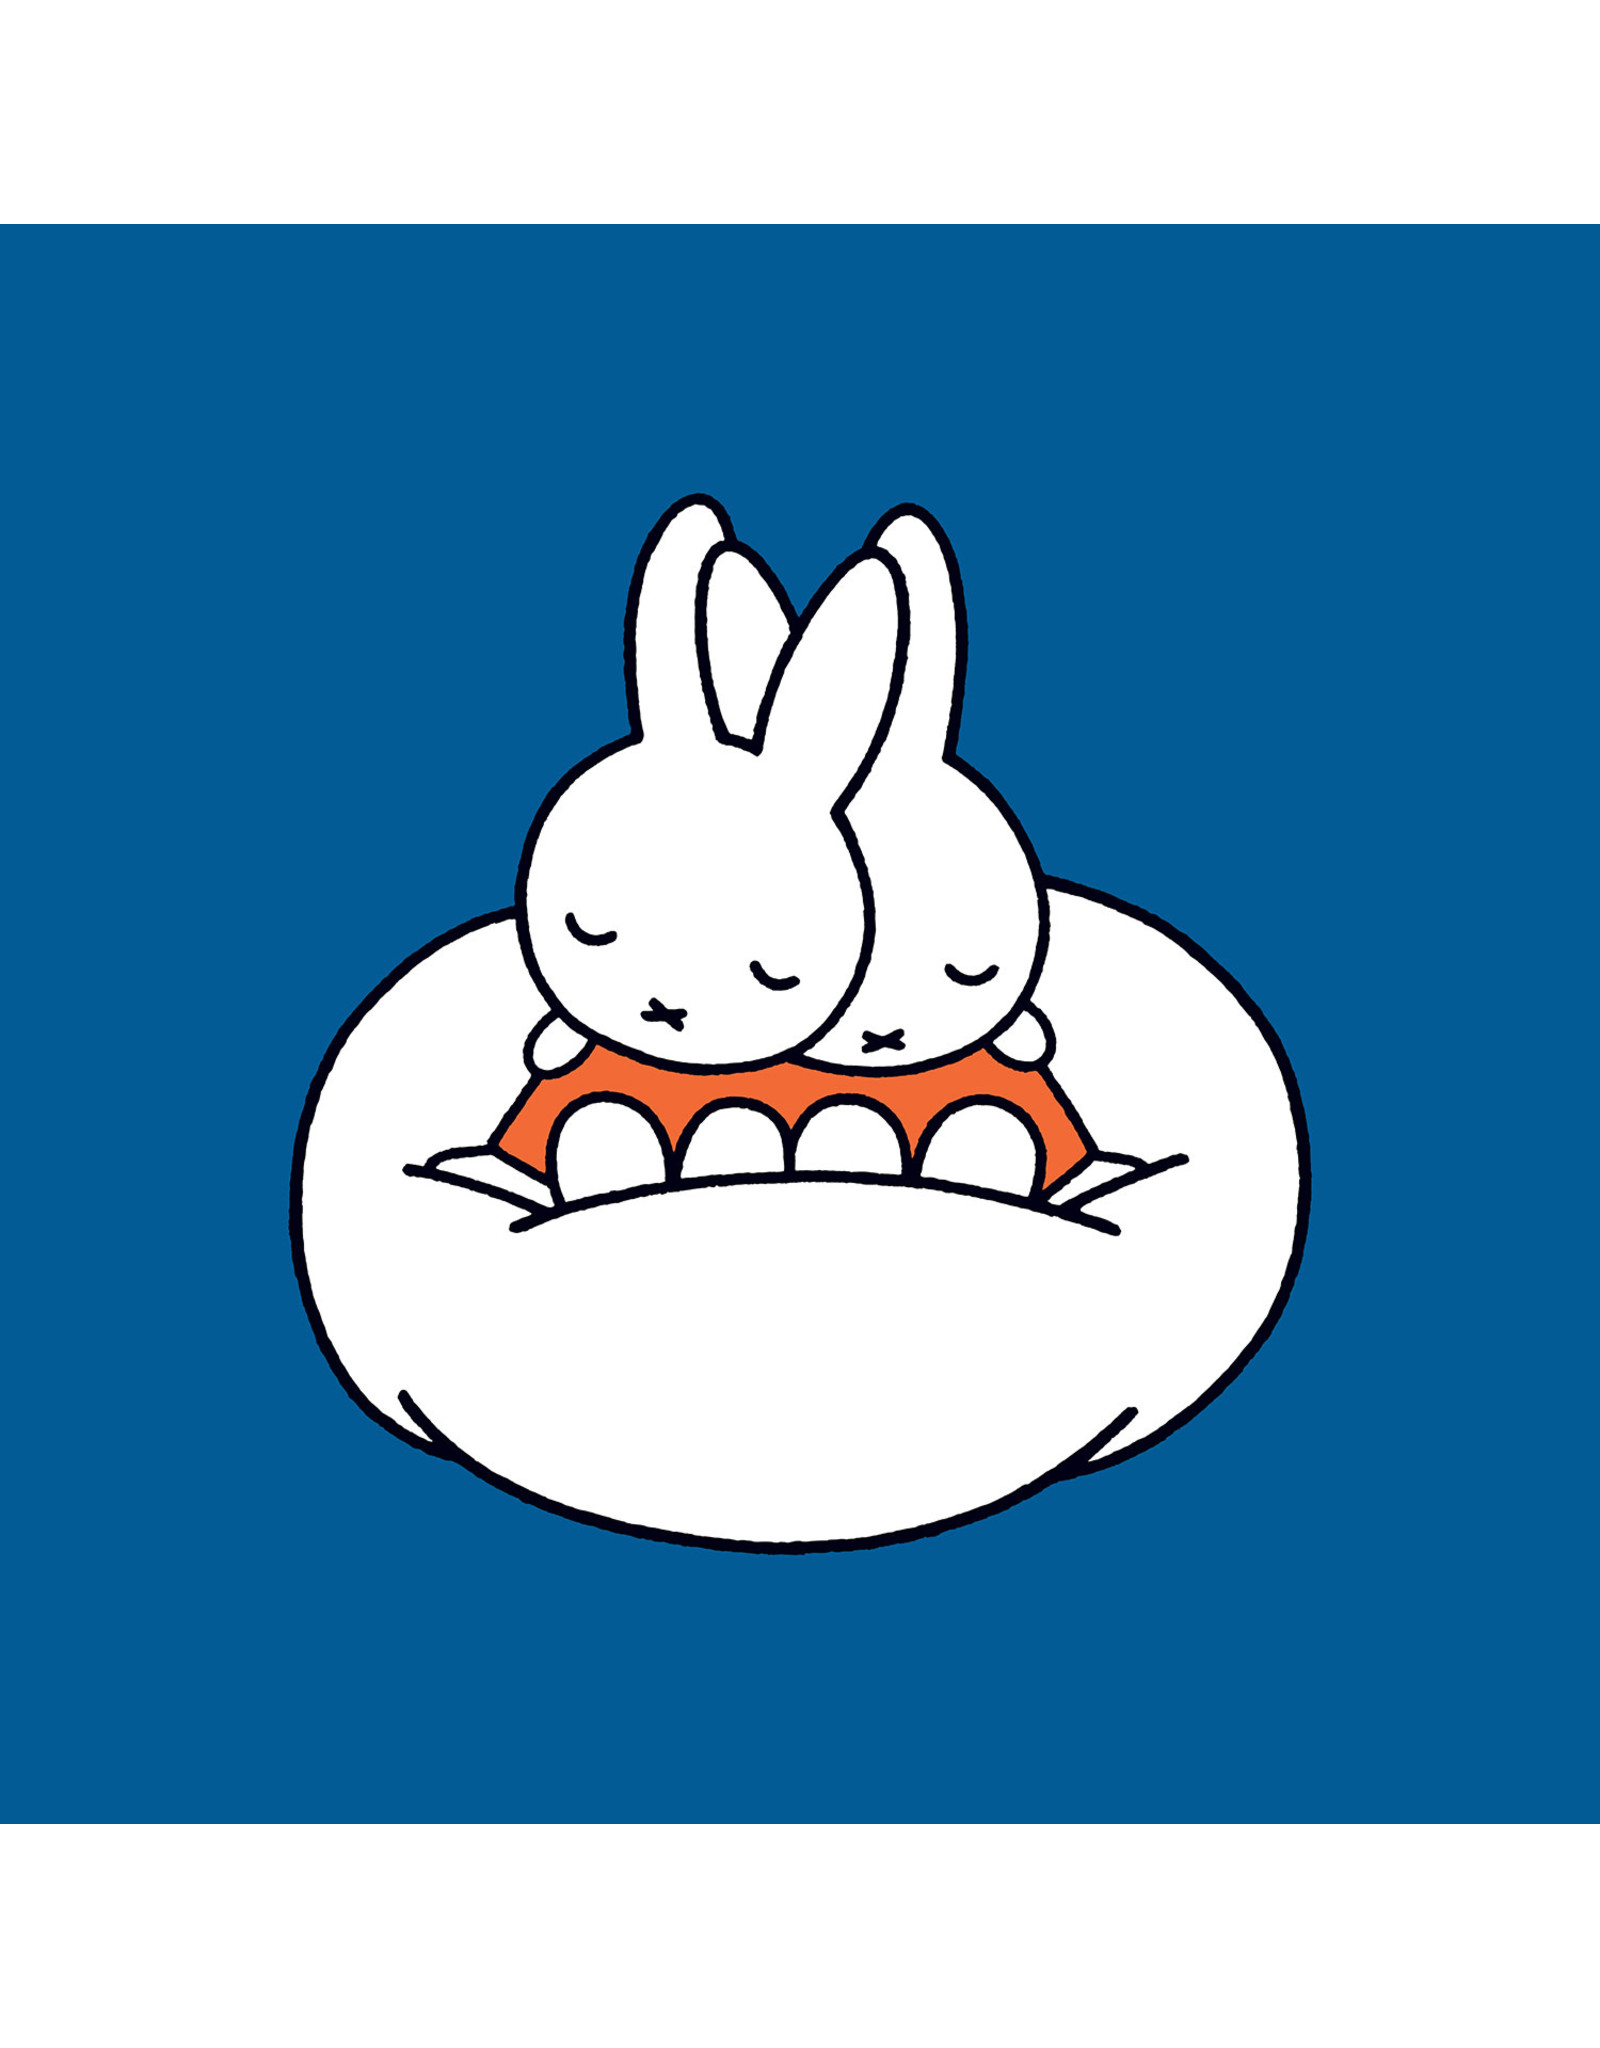 Hype Cards Miffy 071